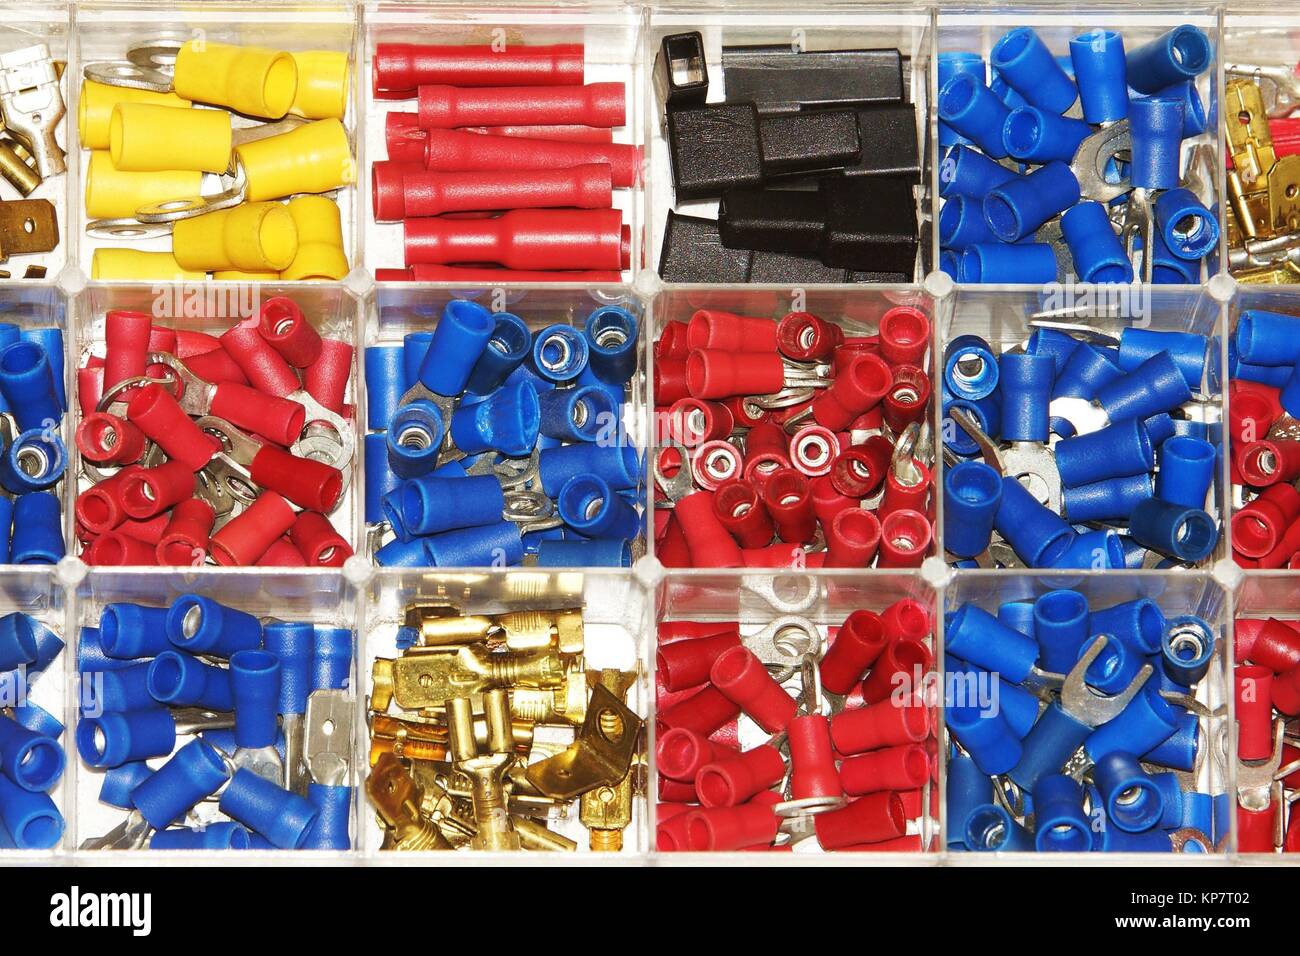 Cable plugs - Assortment Stock Photo